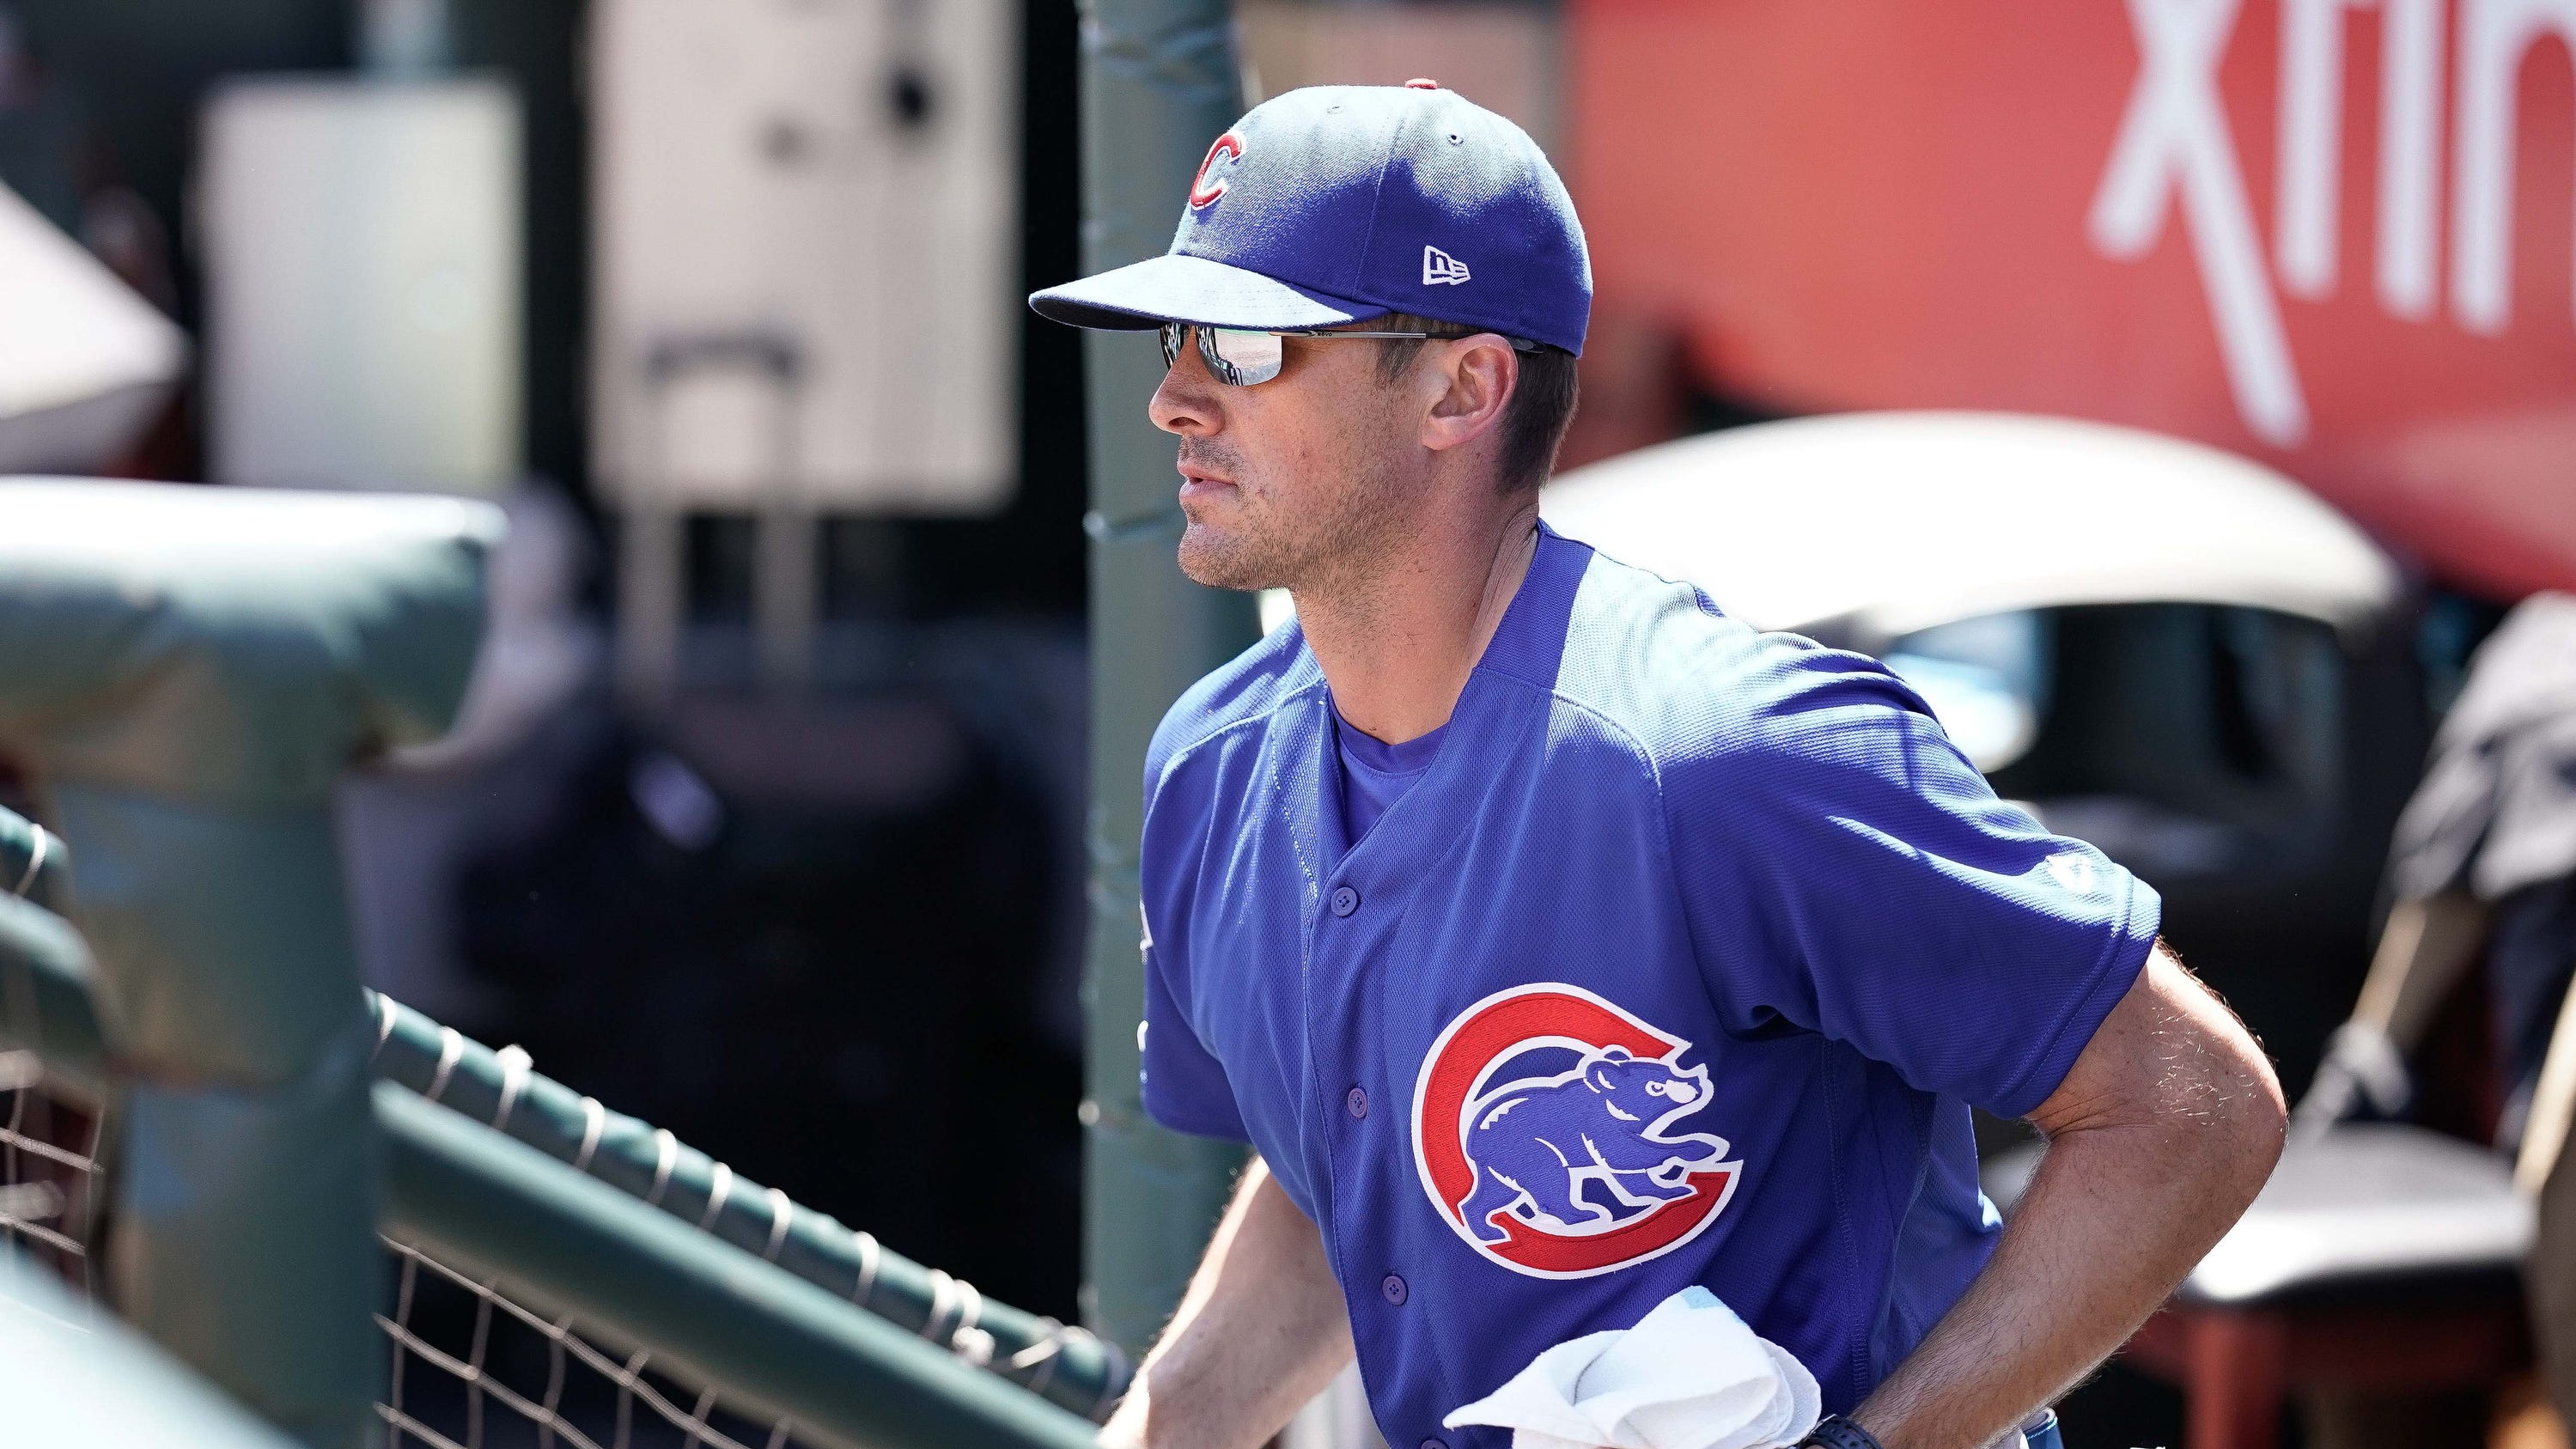 Cubs pitching coach Tommy Hottovy details harrowing COVID-19 battle